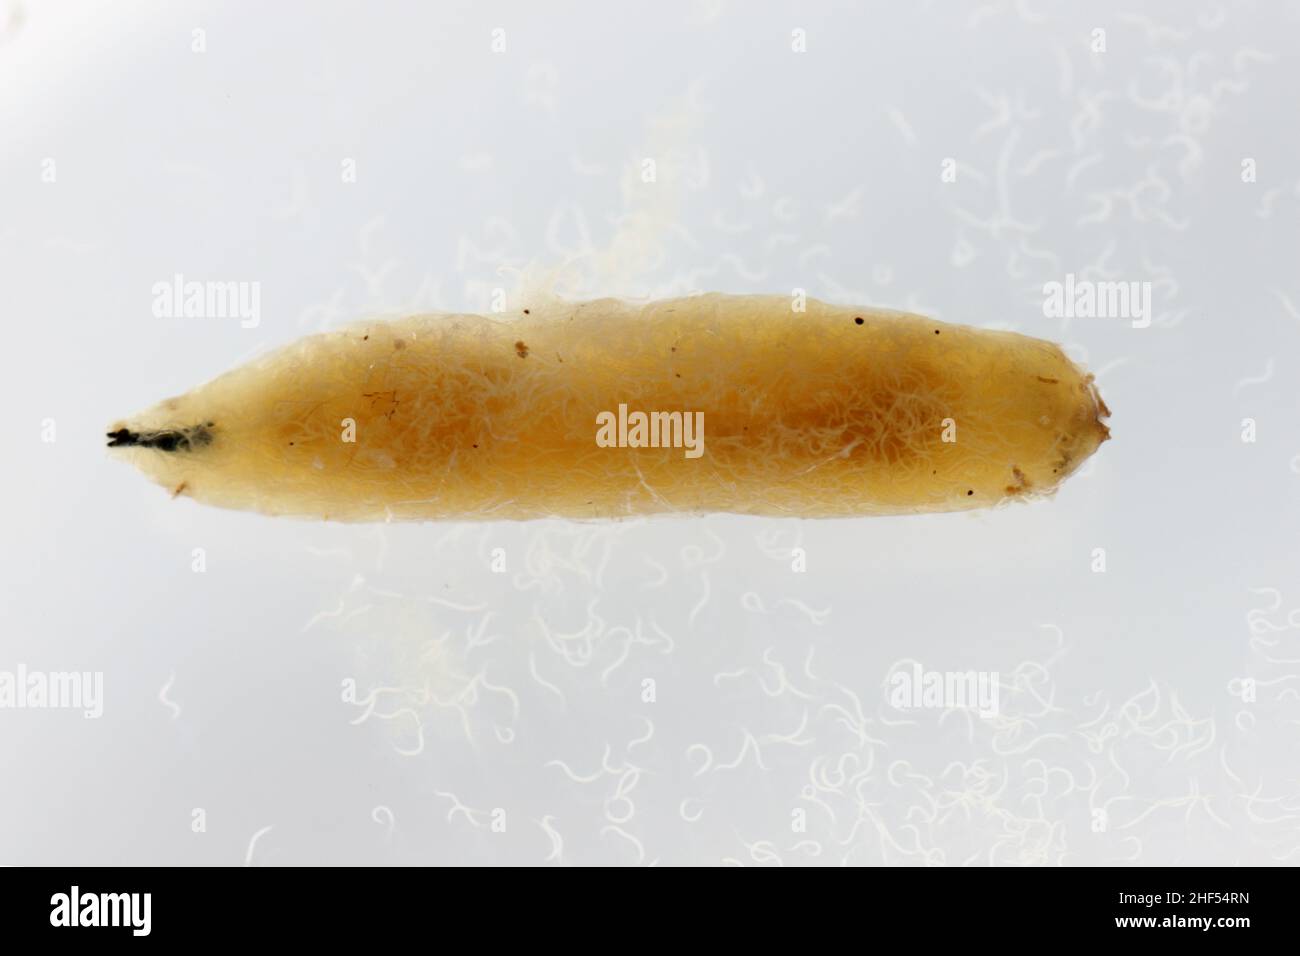 Body of cabbage larvae filled with parasitic entomopathogenic nematodes -Steinernema sp. The nematodes also floated into the water. Stock Photo